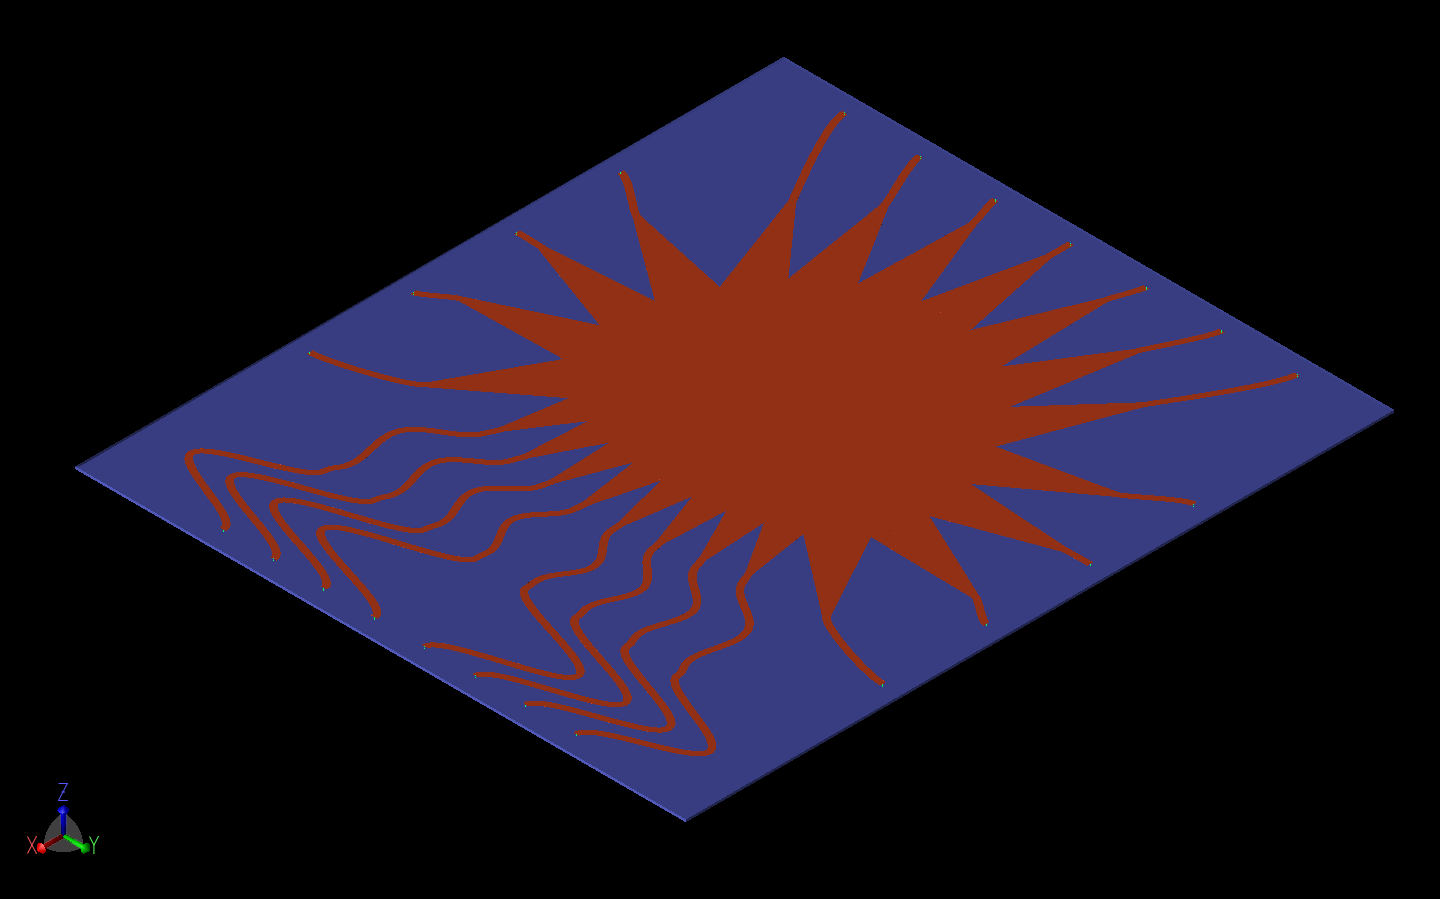 Figure 3: The Rotman lens design is shown in XFdtd following importation of a CAD file that was generated by the RLD software program. The lens is done in microstrip on a 0.254 mm substrate with permittivity of 2.94.